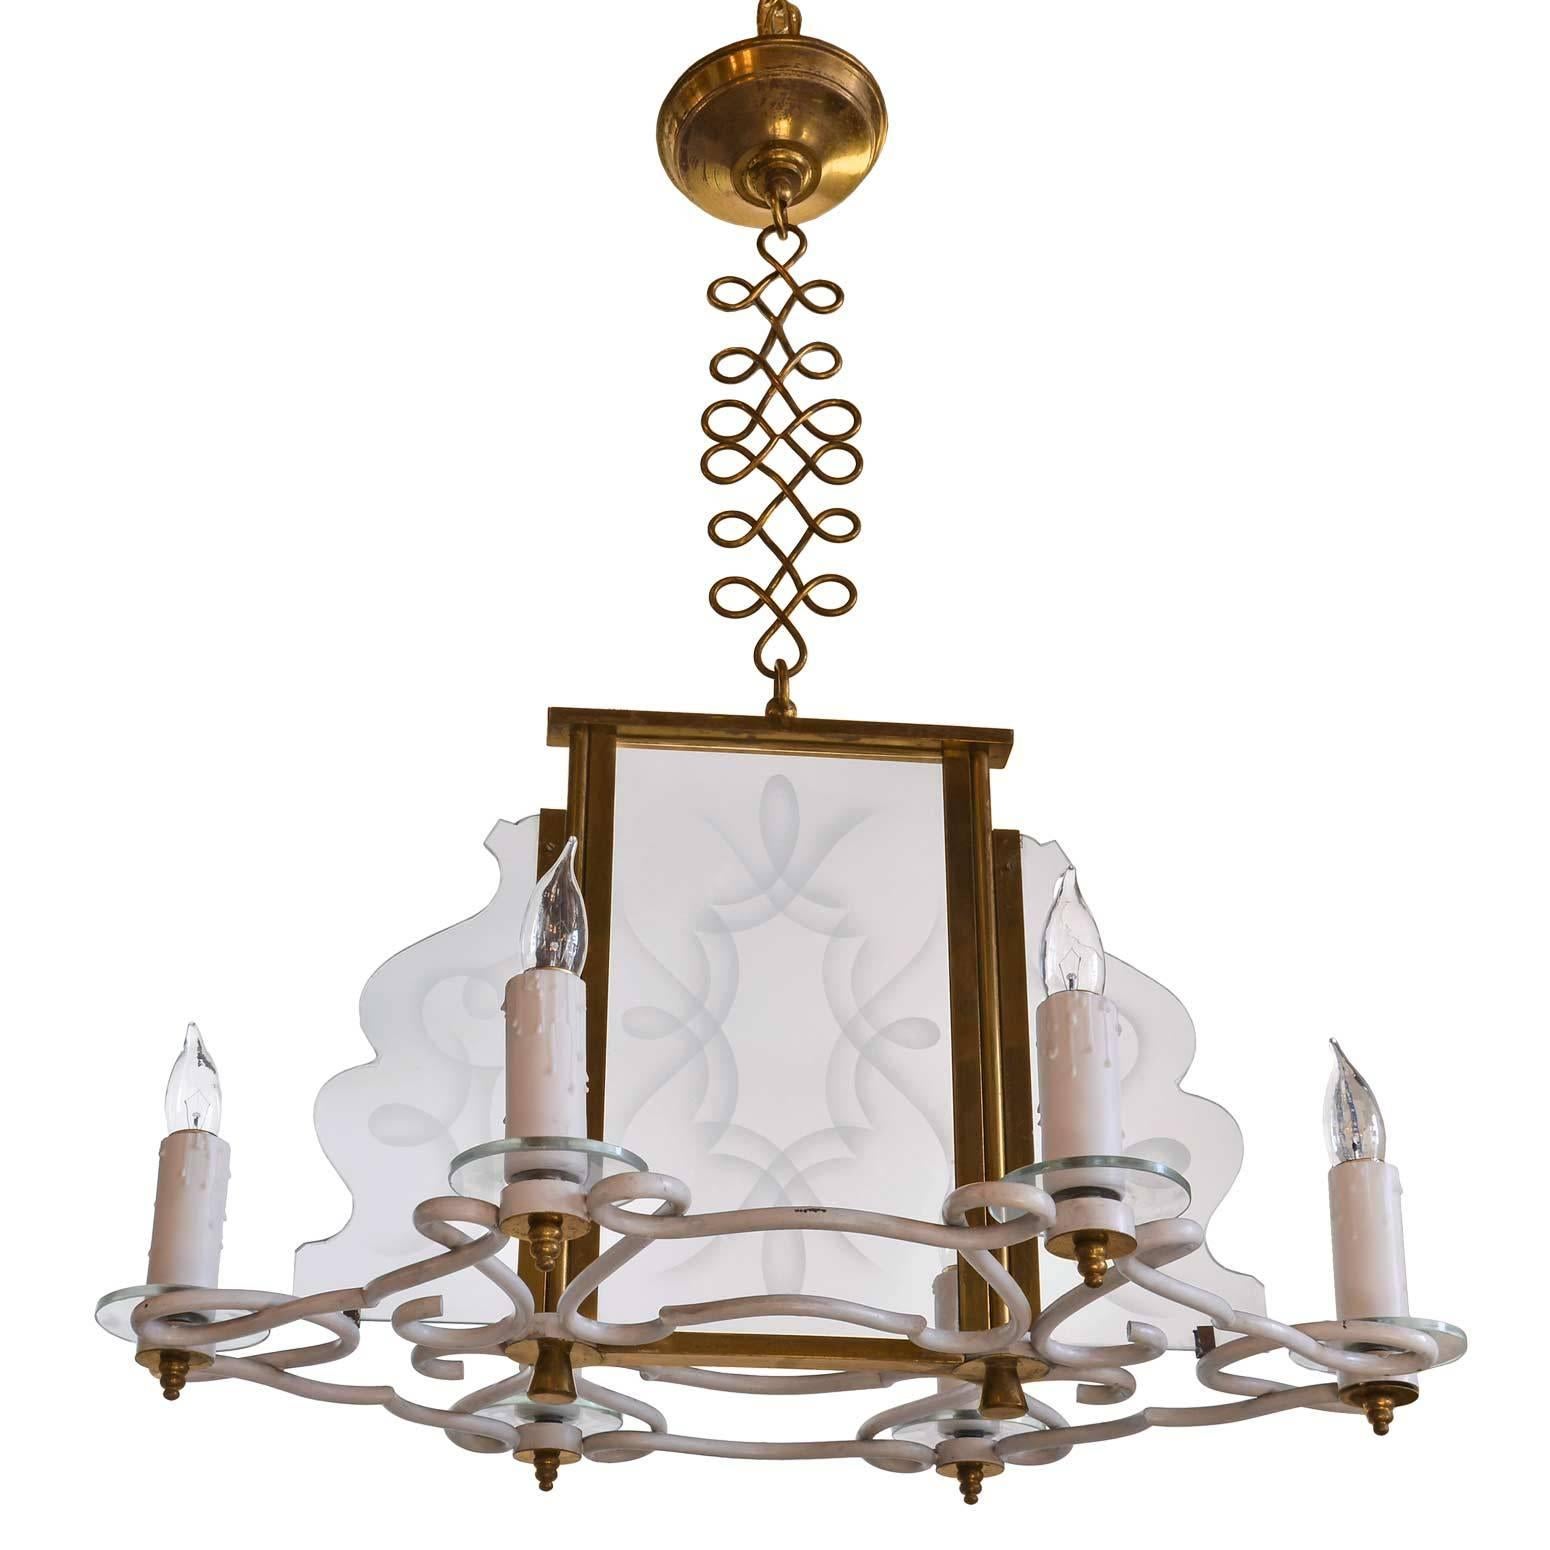 Made from brass and glass circa 1960, this chandelier features unique, cascading glass that complements the oblong, oval shape of the body. This fixture has a motif of twisting, curling shapes throughout-- the panels are etched with a curving design